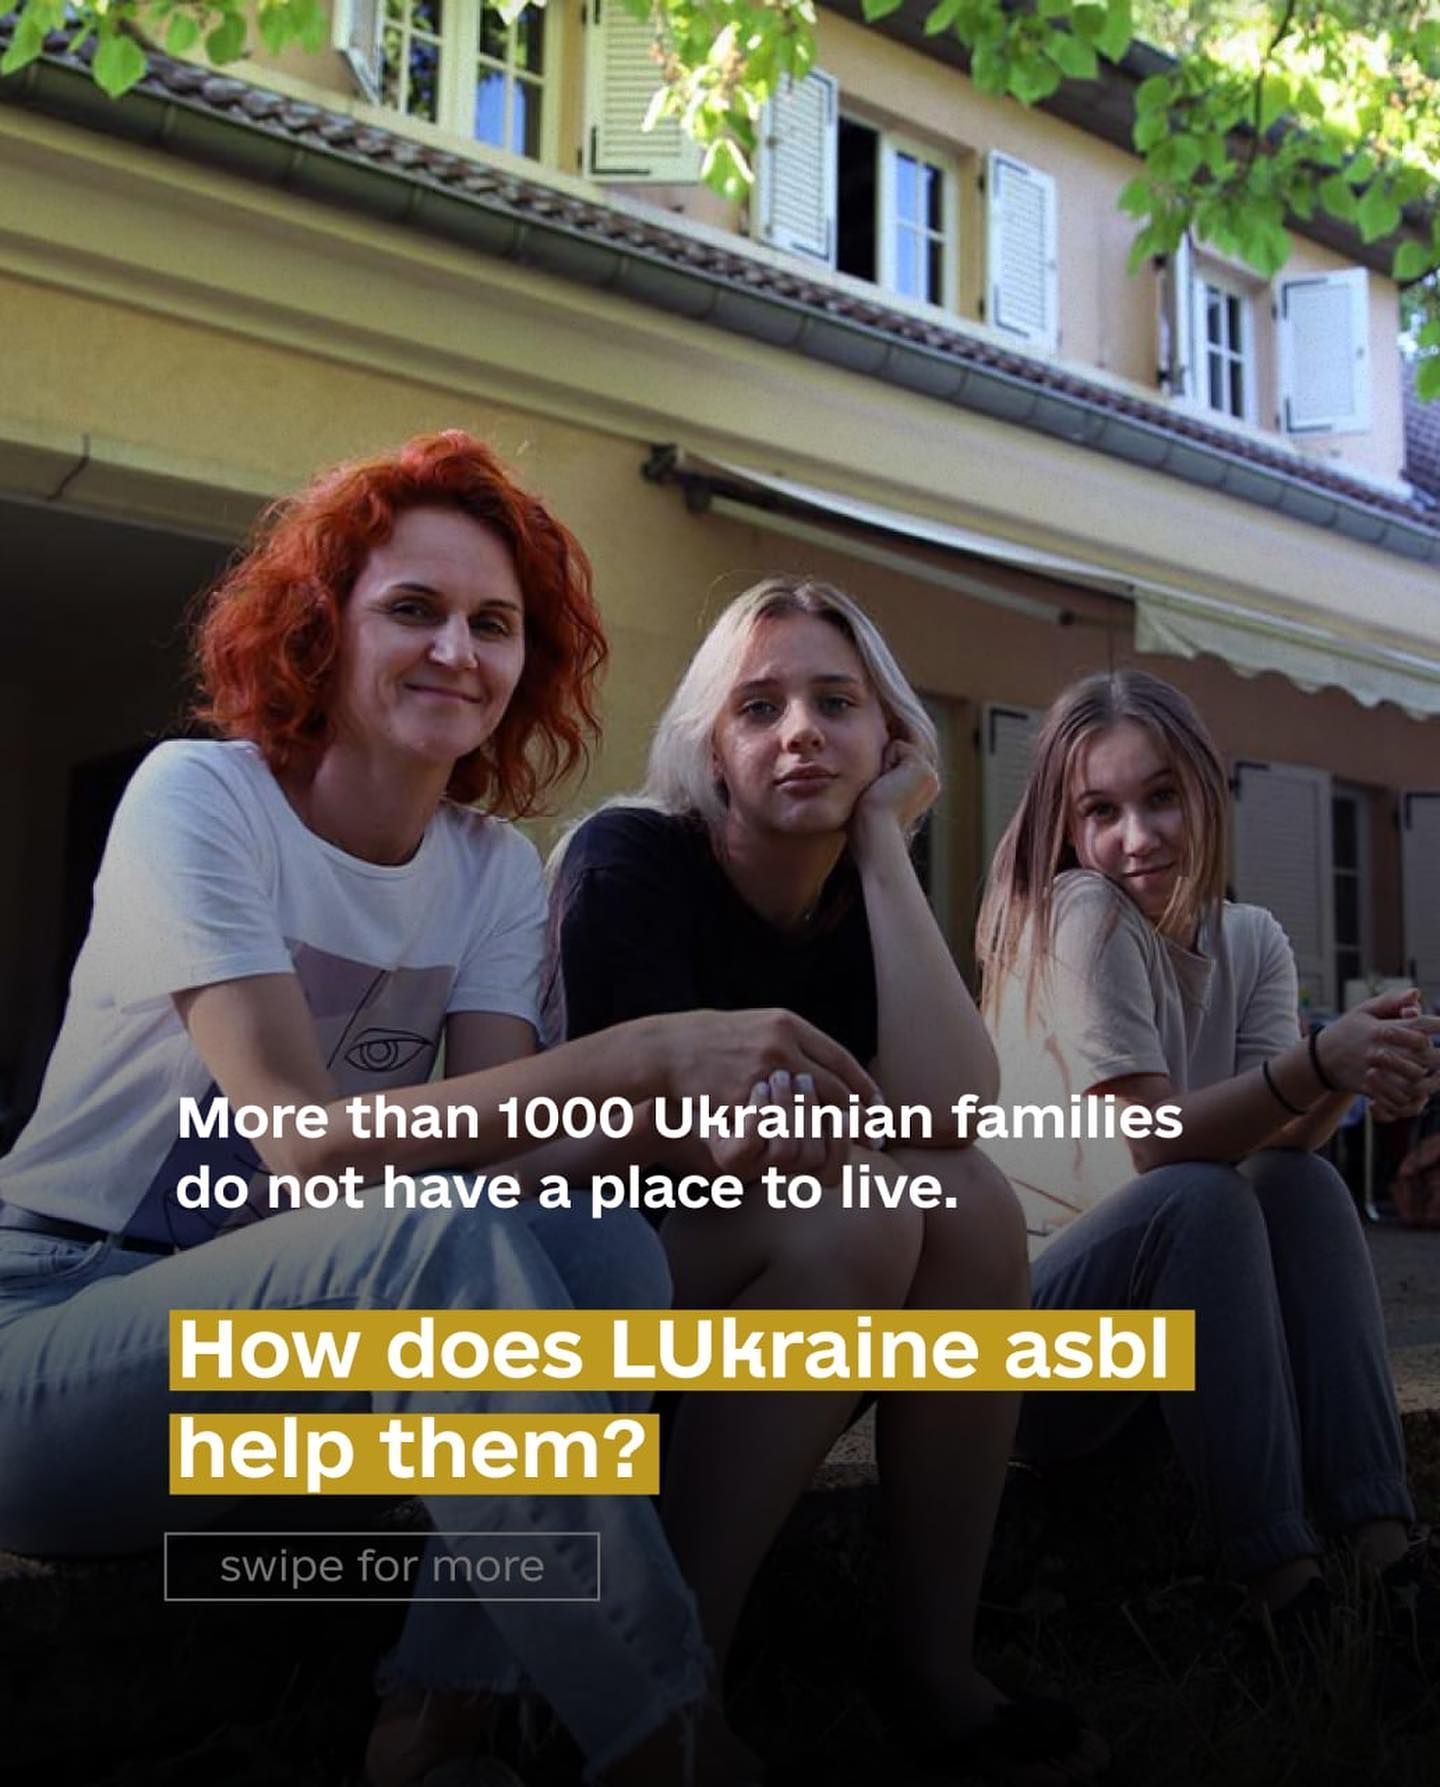 Your Donation for LUkraine asbl